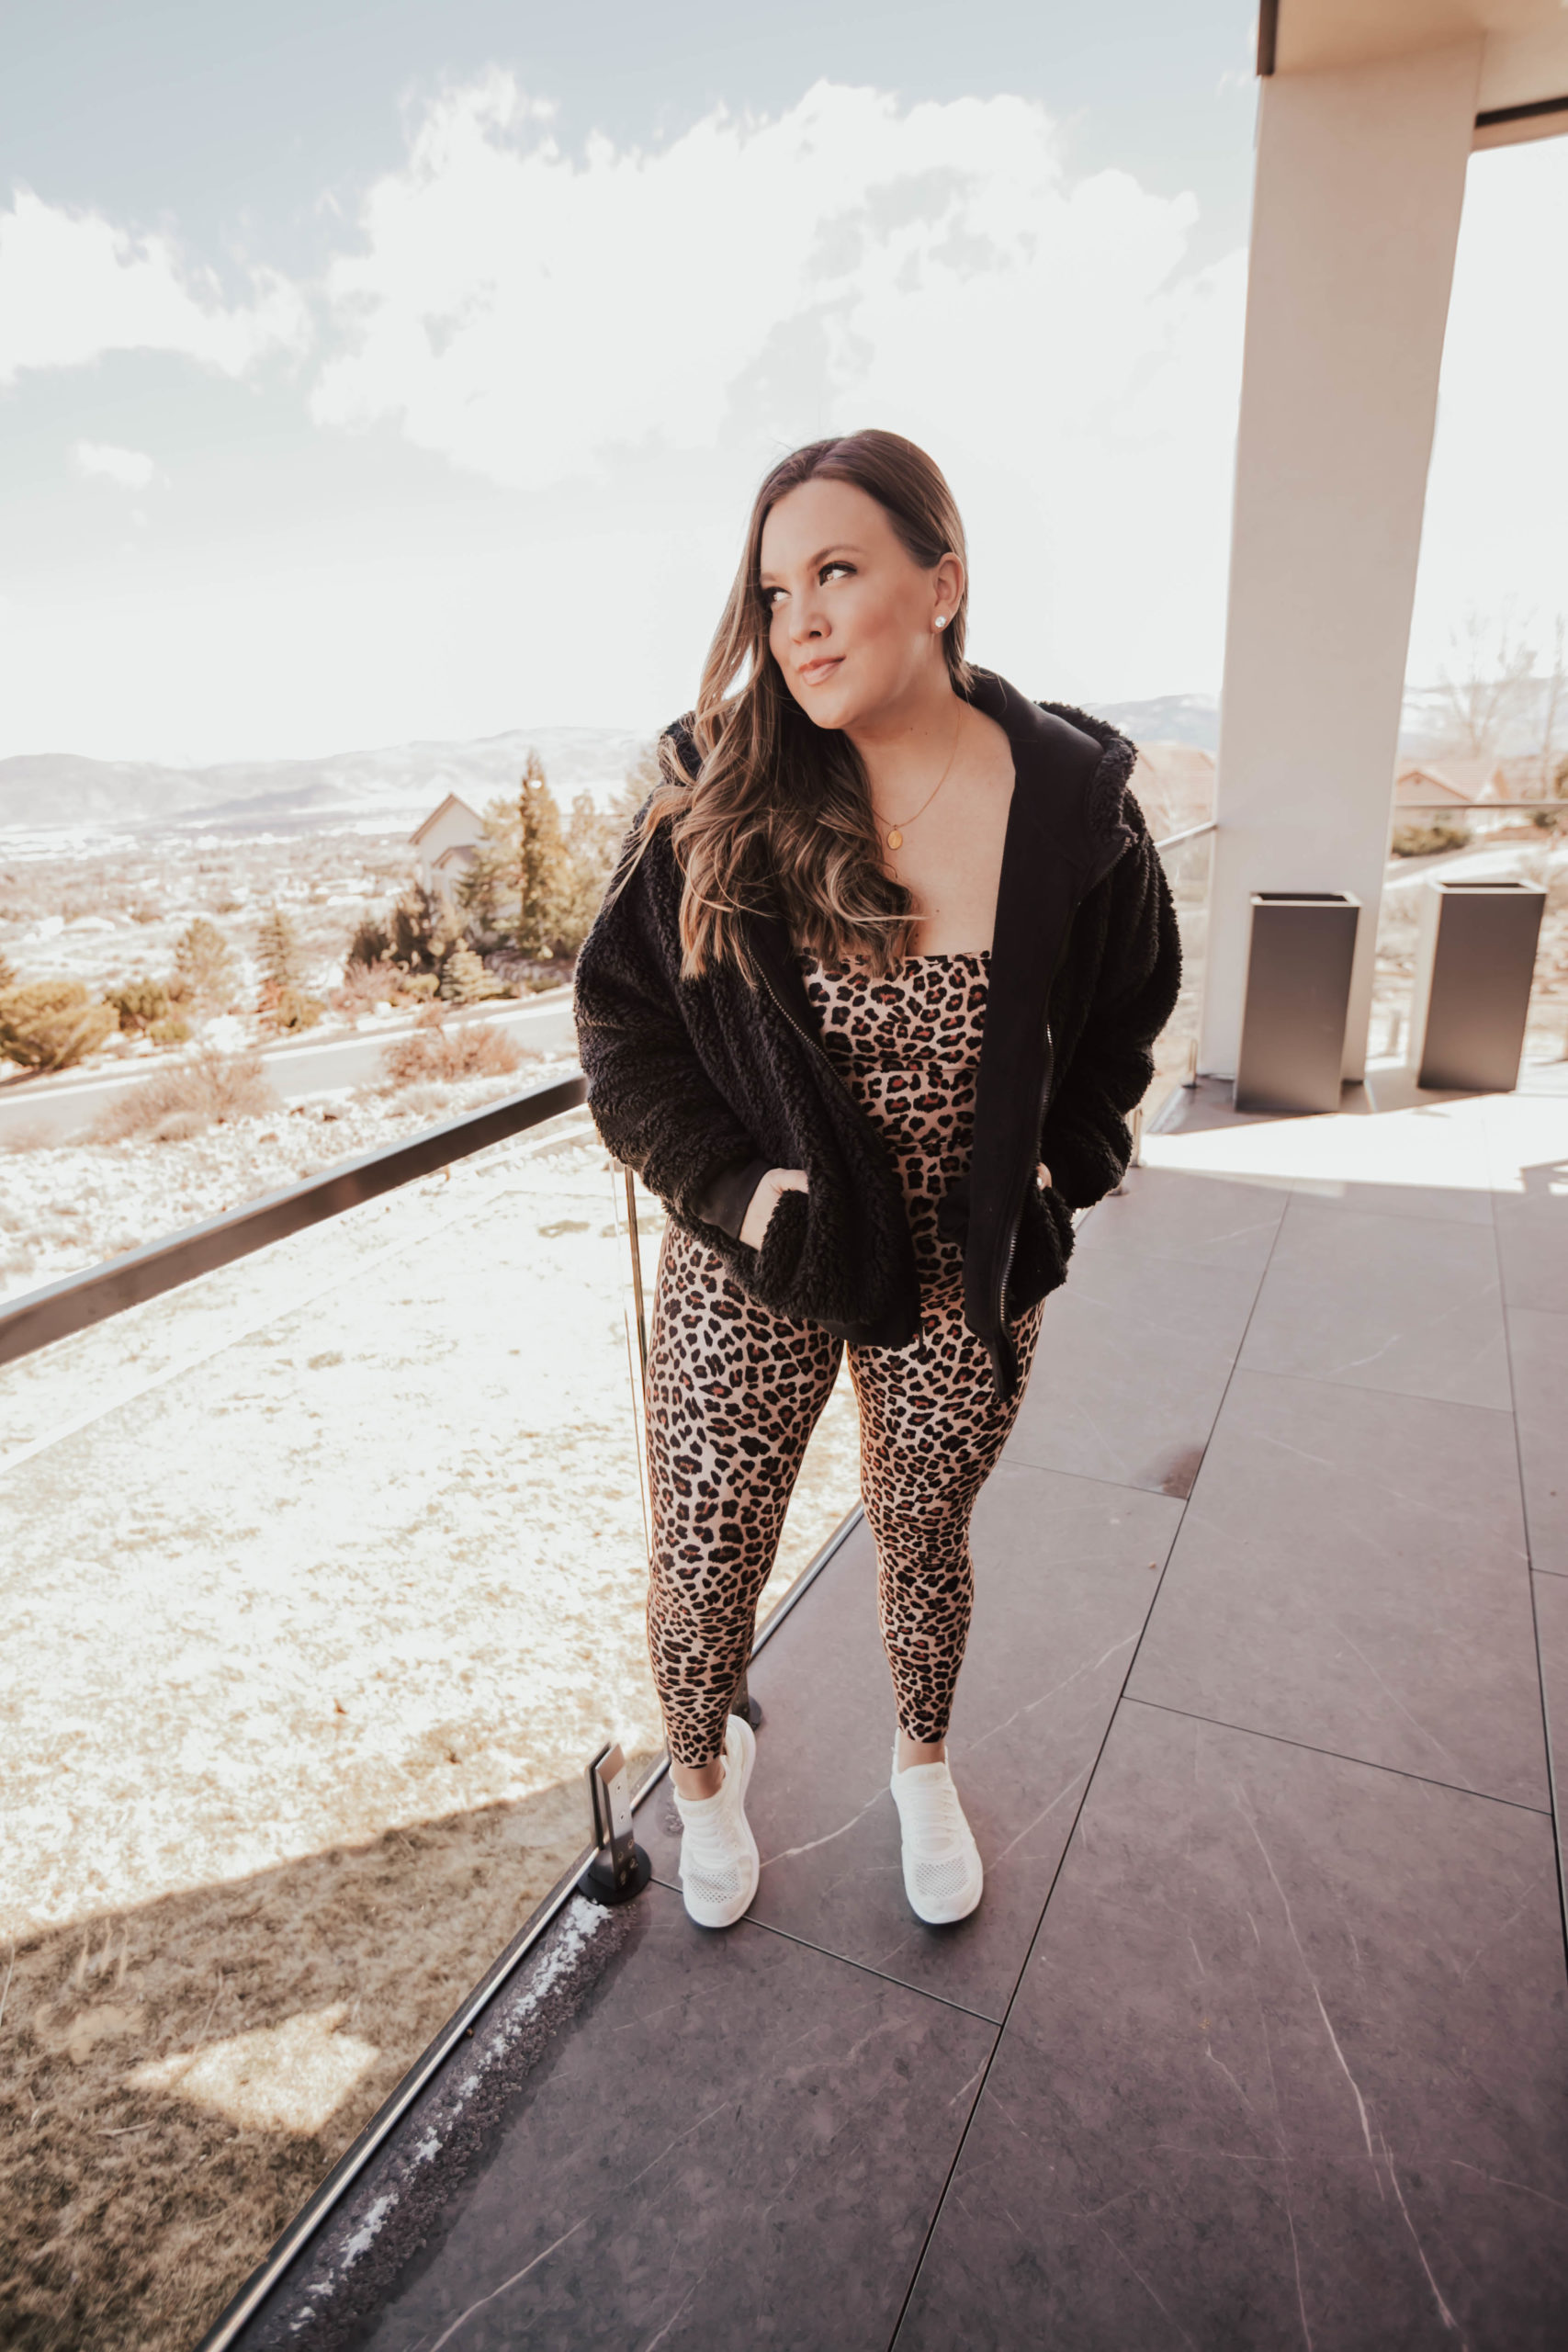 Reno blogger, Ashley Zeal Hurd from the Ashley and Emily blog shares the best activewear for spring to get her motivated!